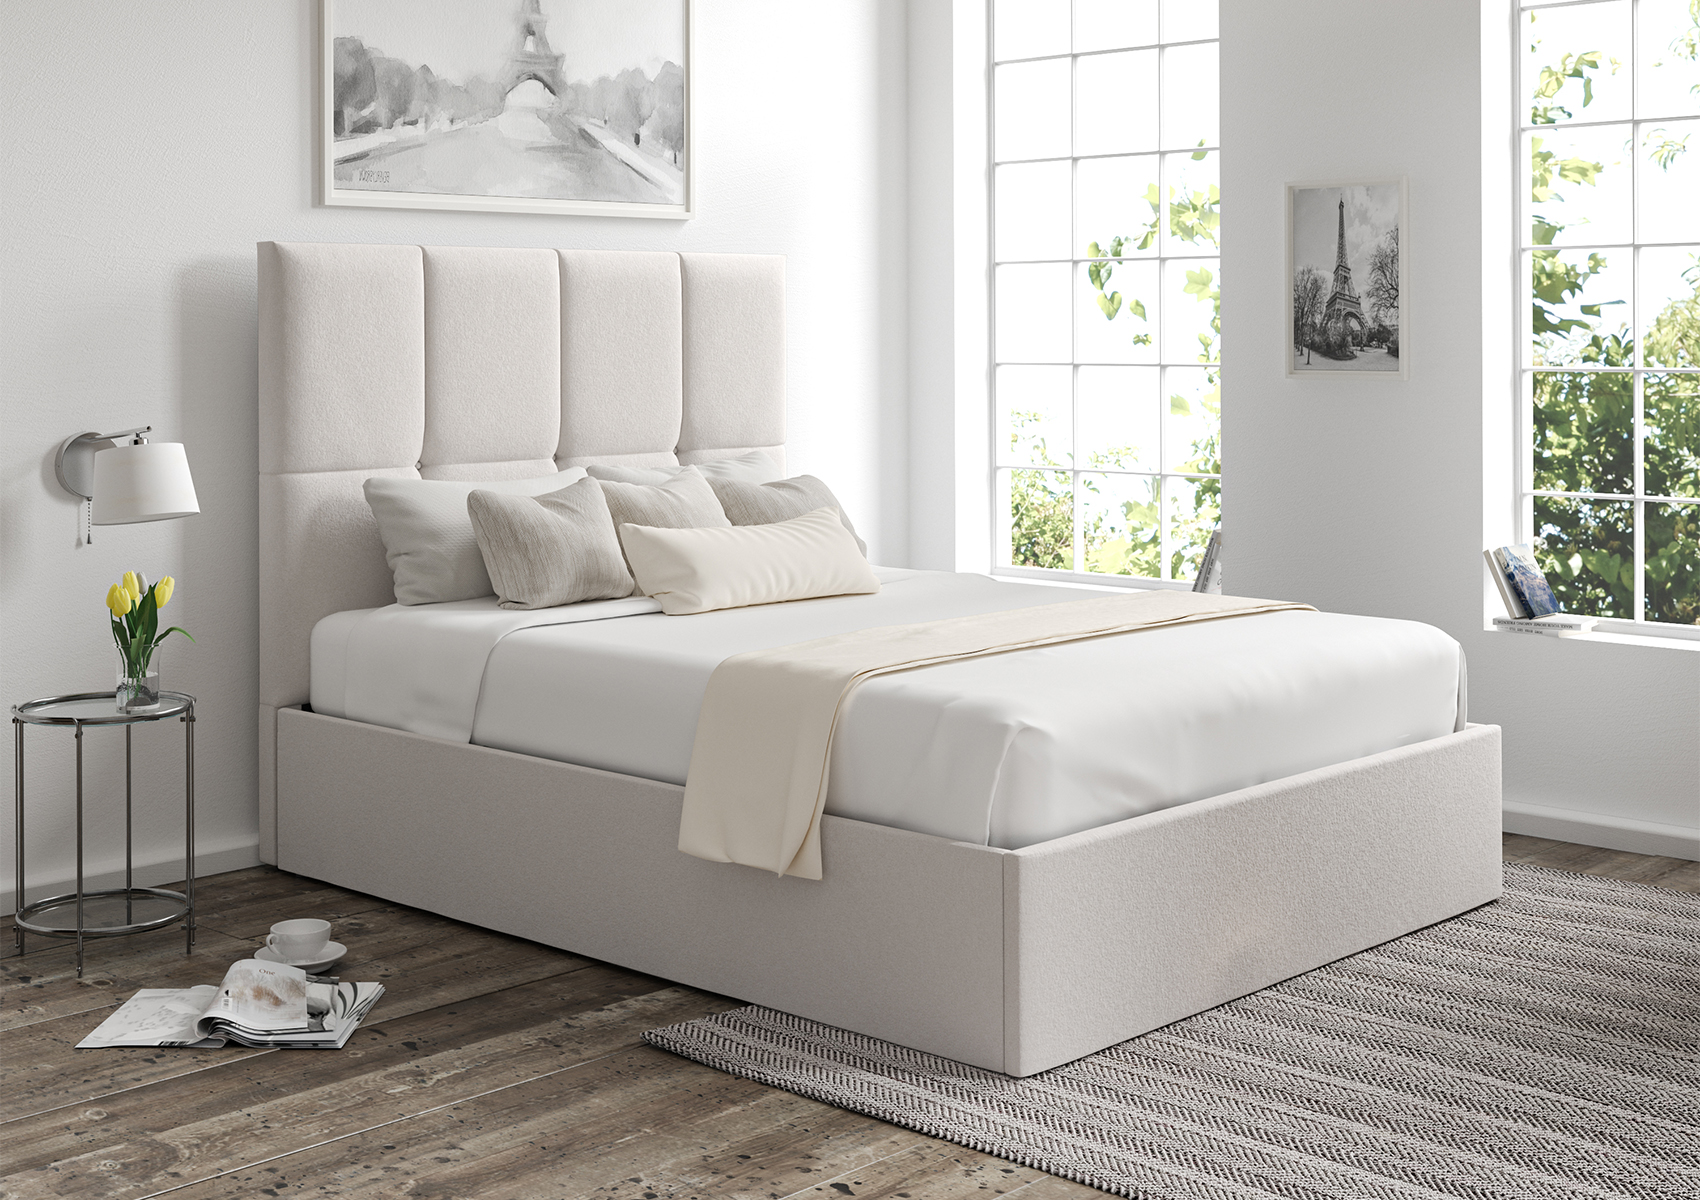 View Turin Arran Natural Upholstered Ottoman Bed Frame Only Time4Sleep information